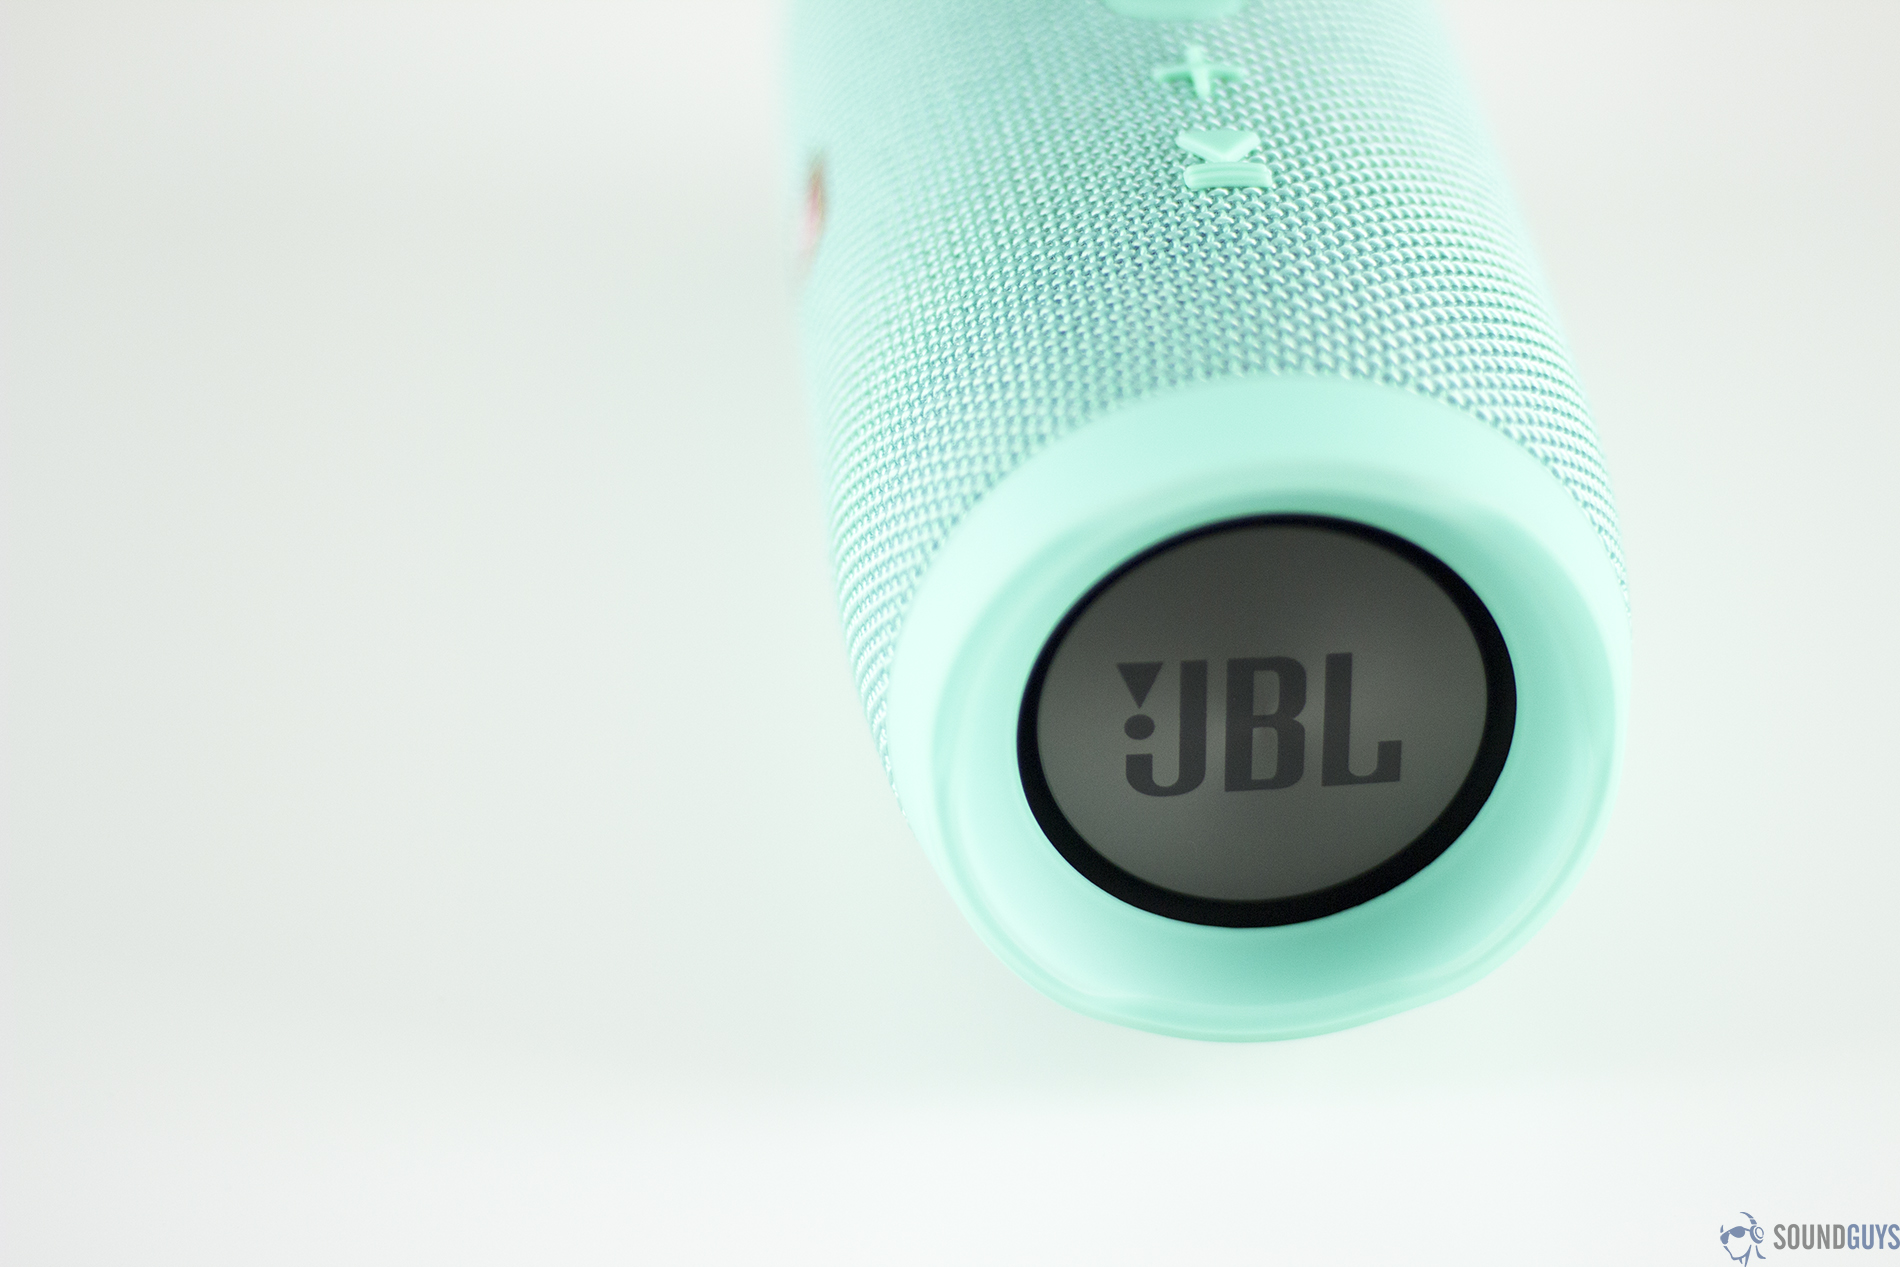 The passive bass radiator on the side of the JBL Charge 3.